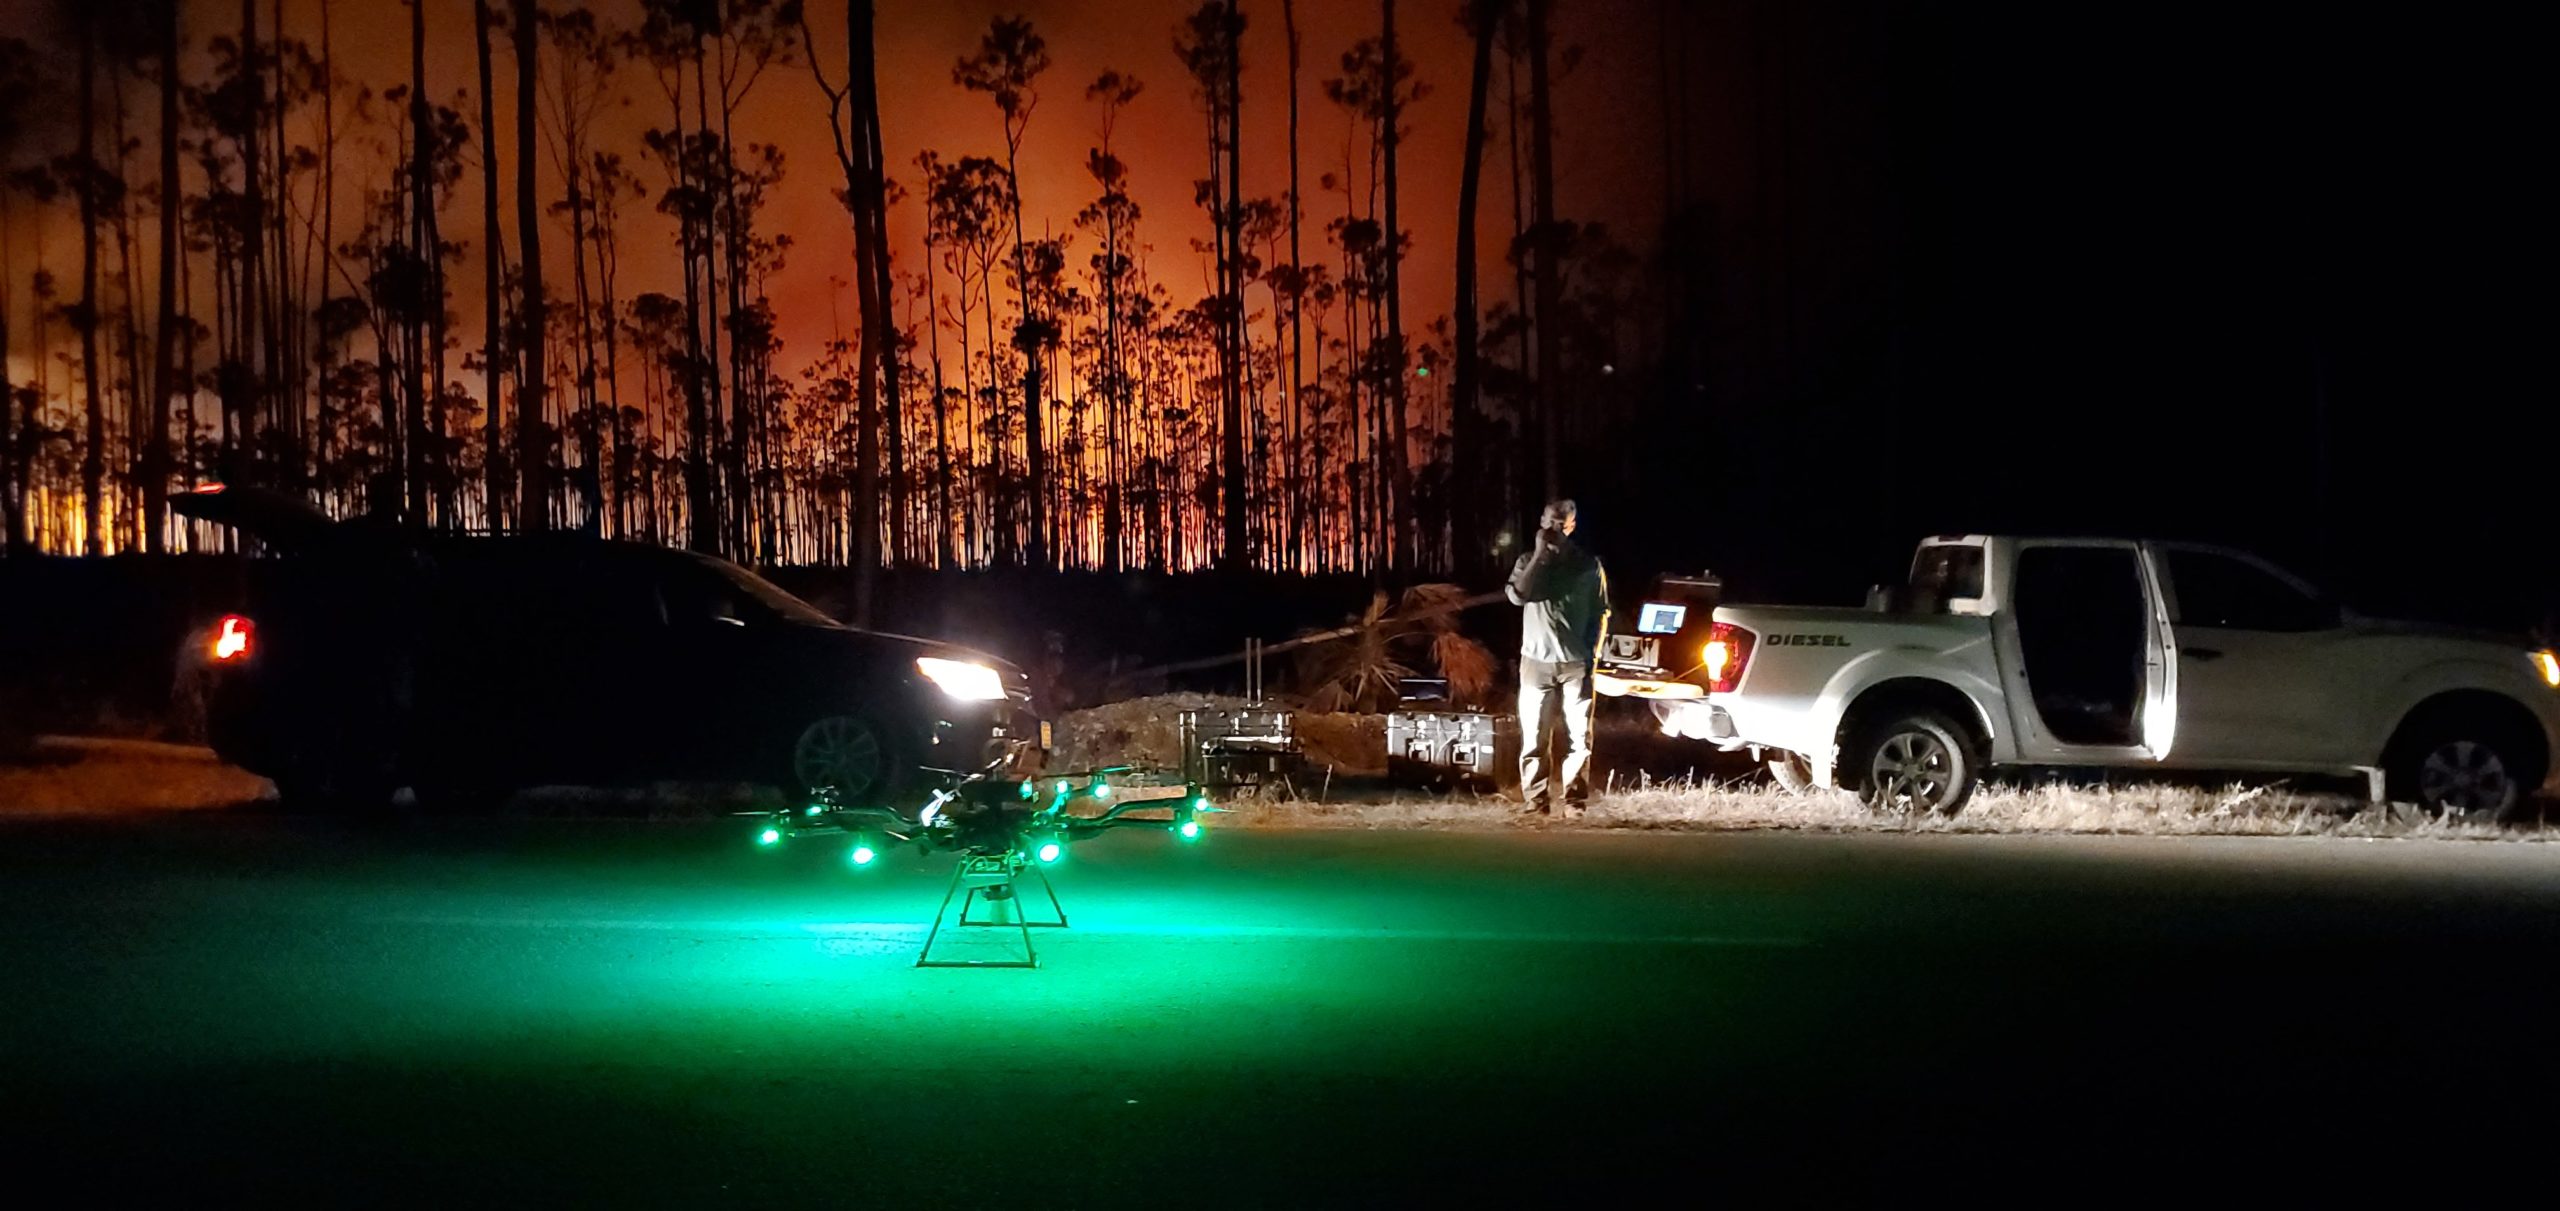 The Swift Engineering UAS team preparing another launch to assess wildfire threats in the Bahamas.